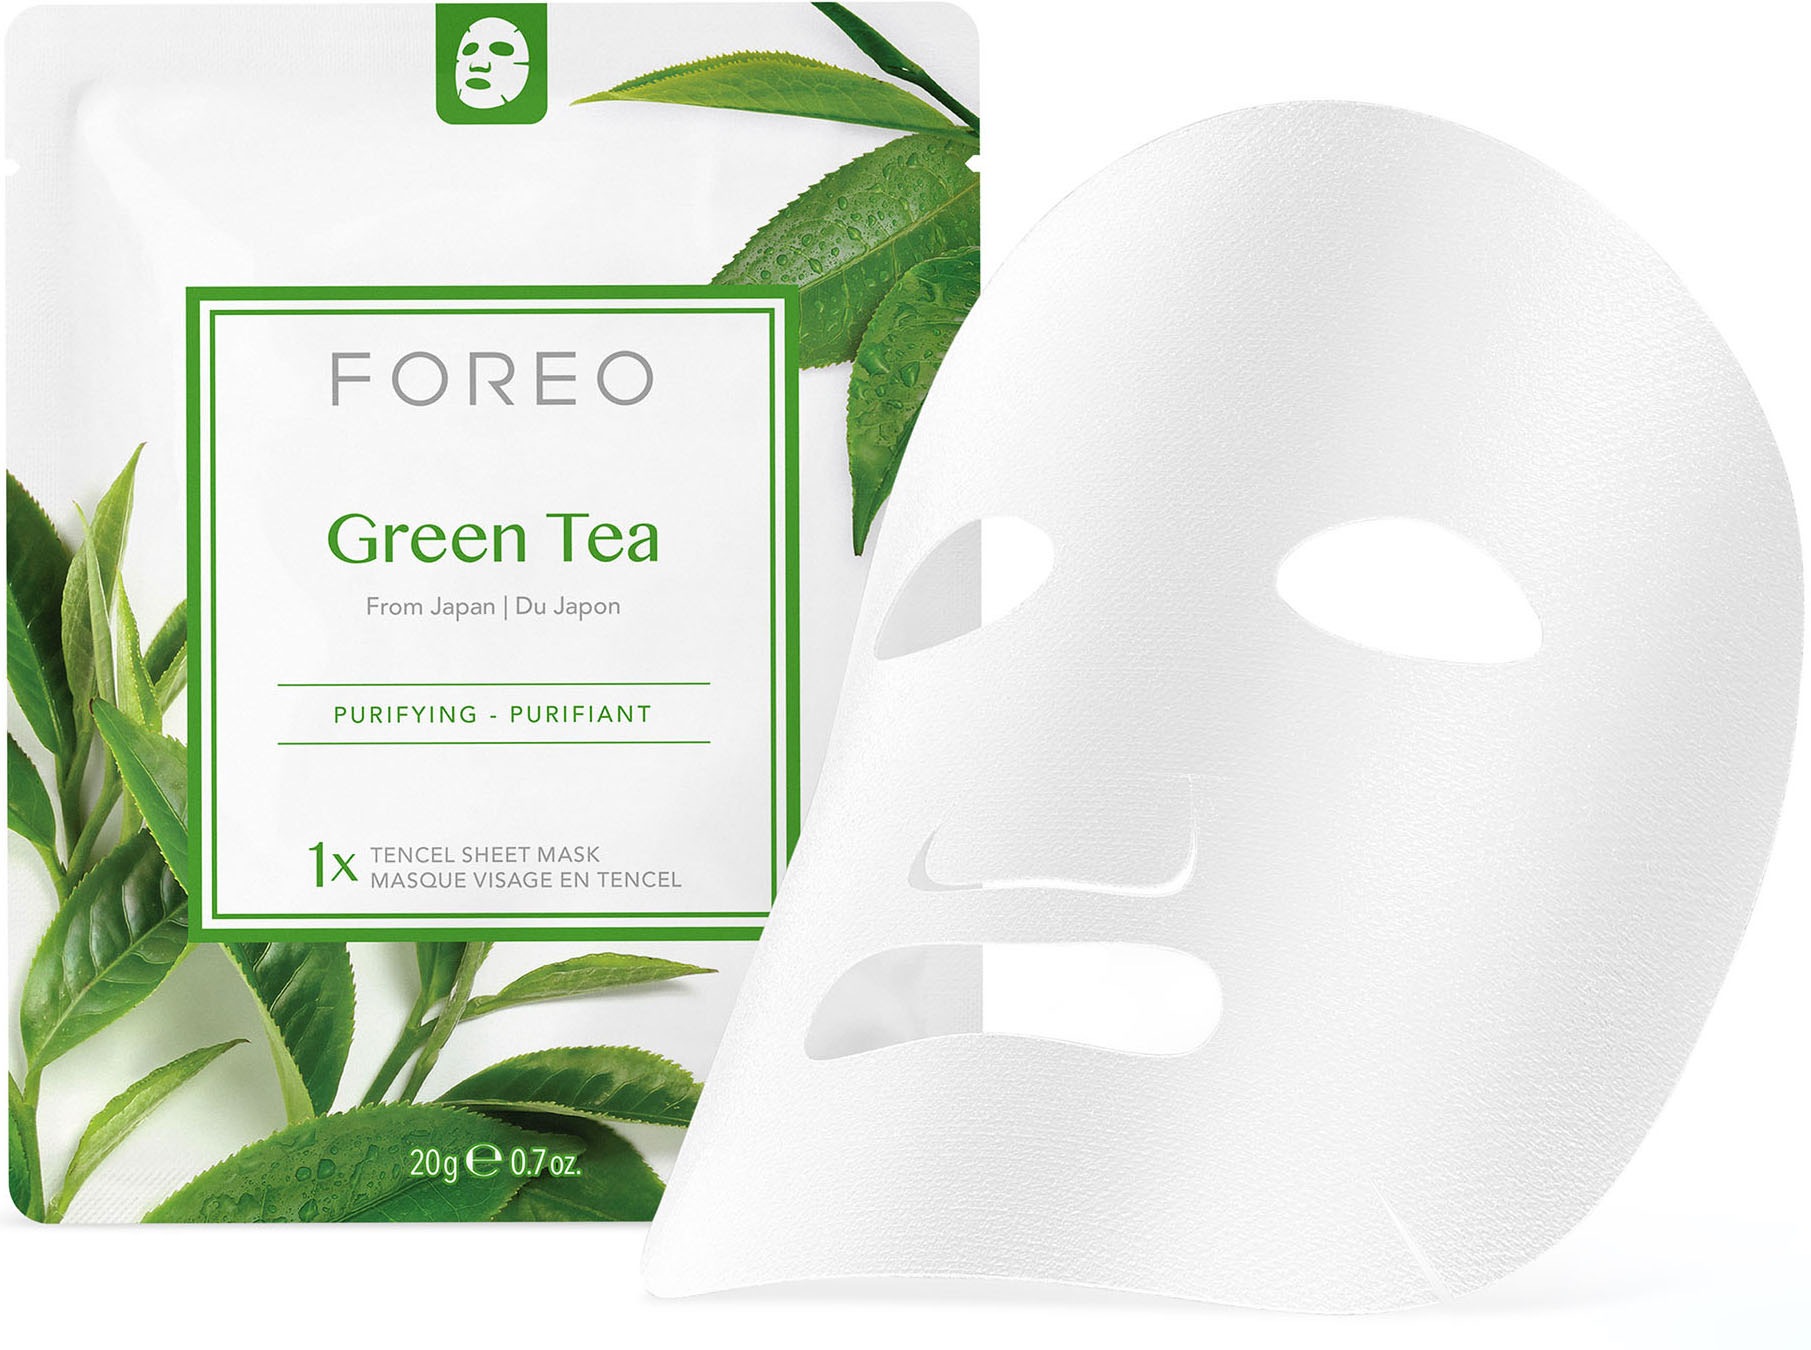 Gesichtsmaske Masks Face bei FOREO OTTOversand »Farm Green To Sheet Tea« Collection